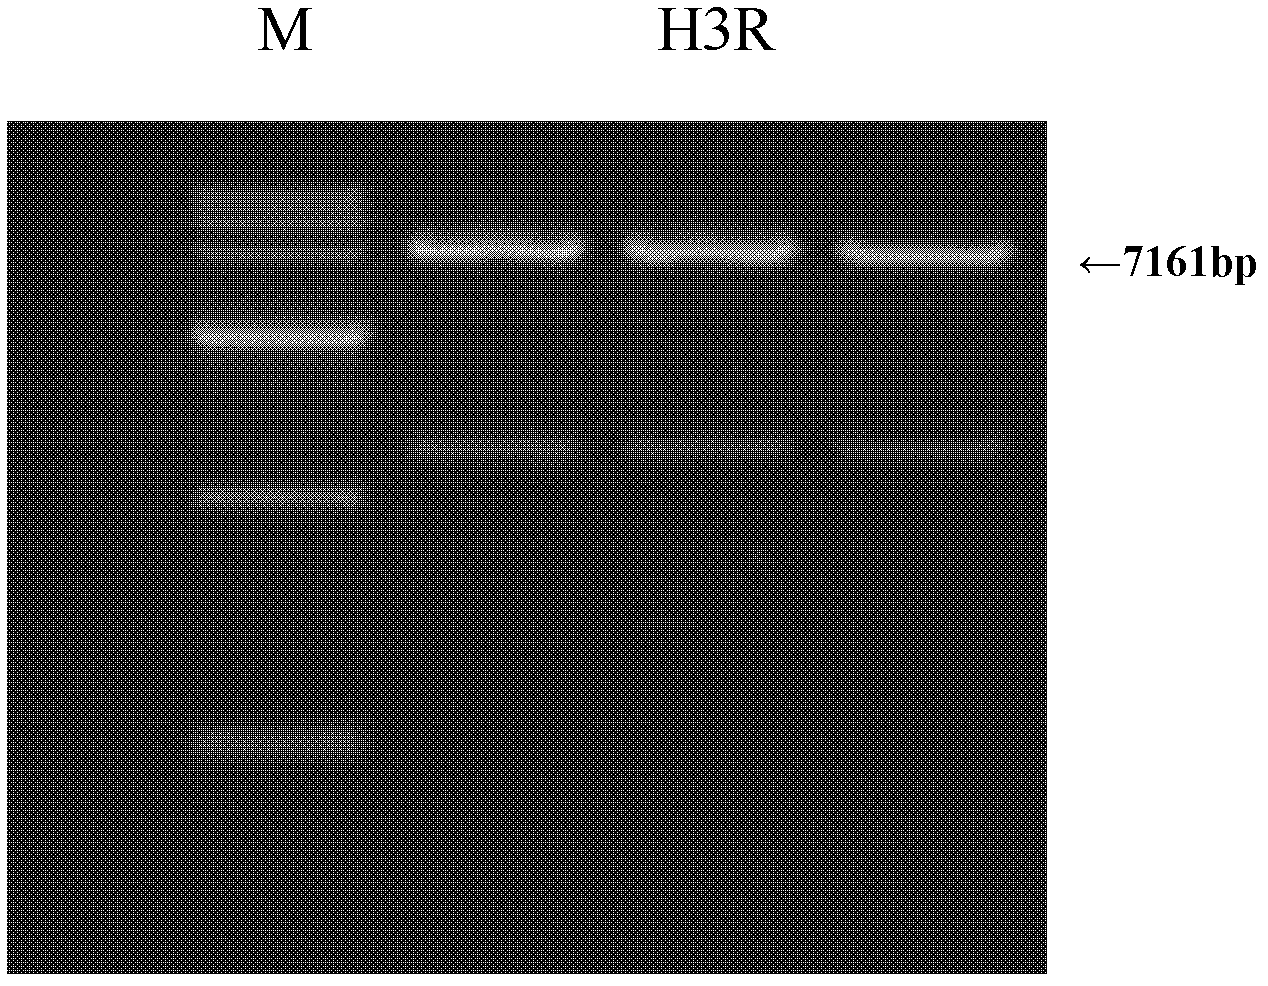 Construction method of recombinant HEK (human embryonic kidney) 293 cells highly expressing H3R (histamine receptor 3)